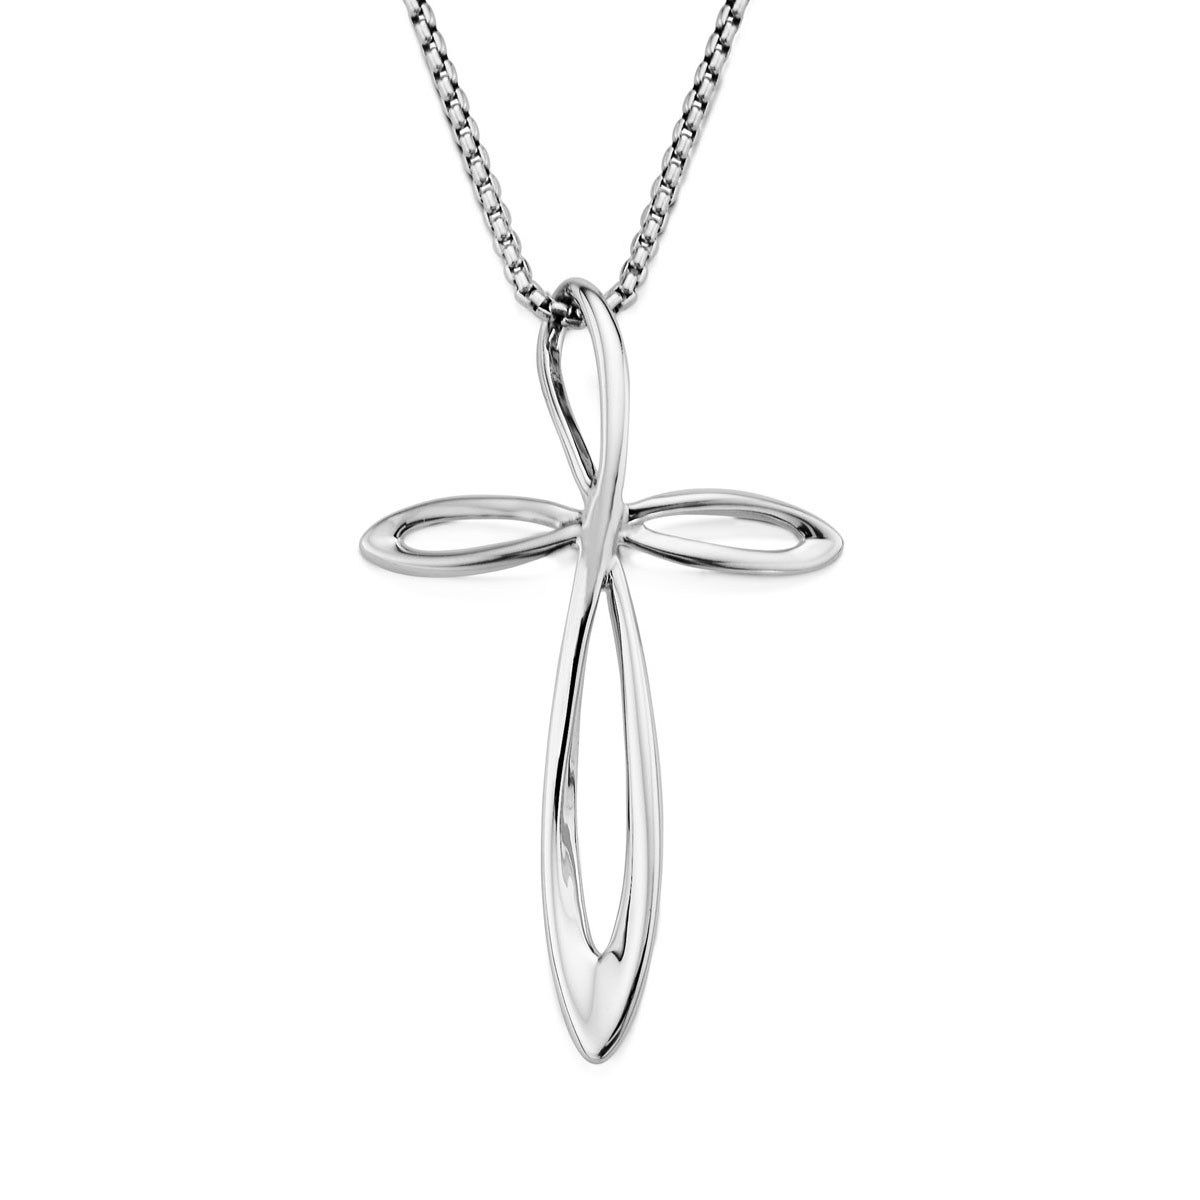 Nambe Jewelry Silver Cross Necklace